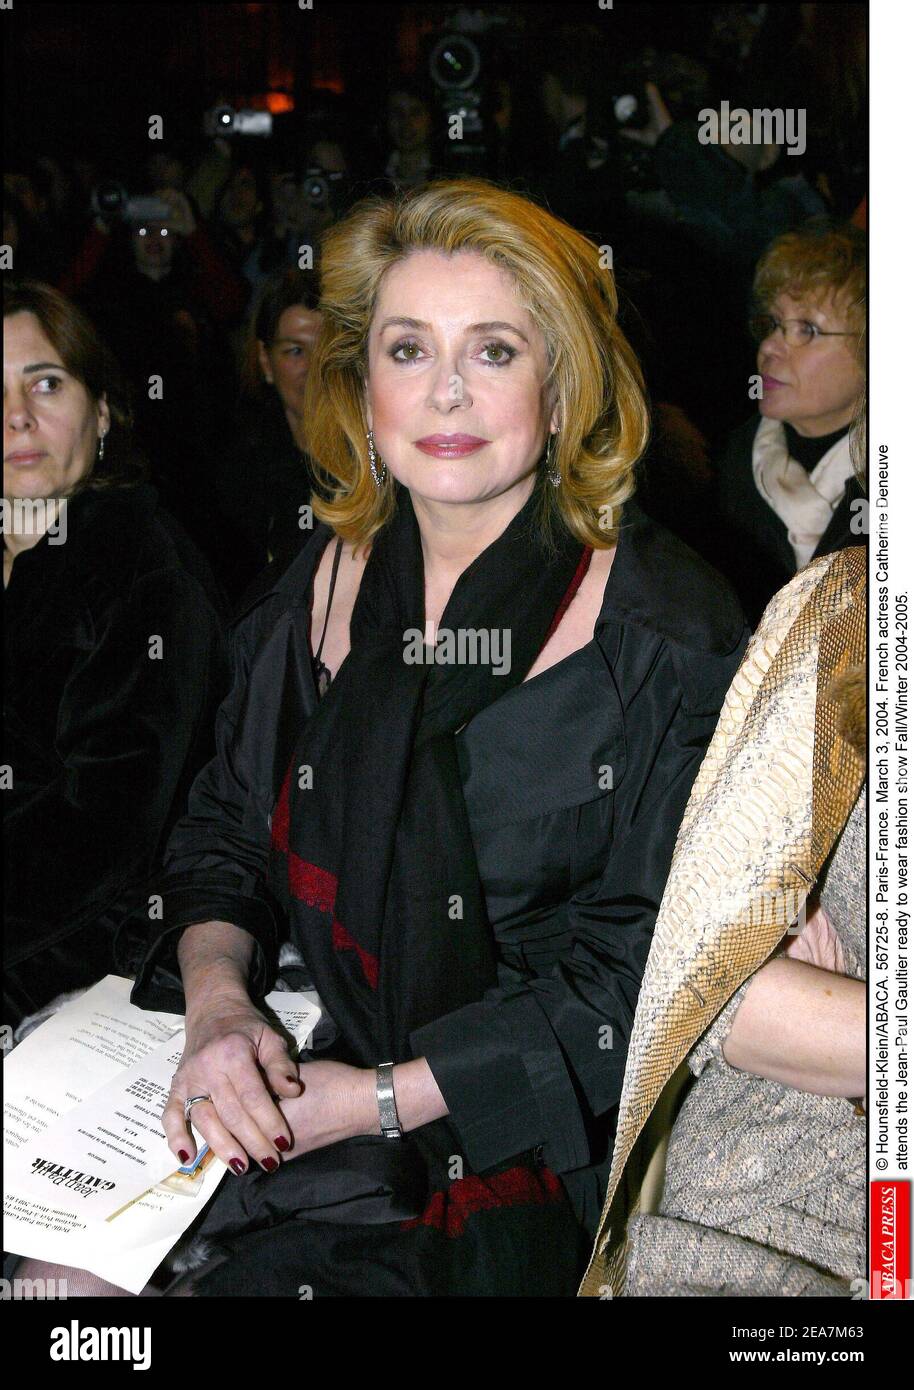 Hounsfield-Klein/ABACA. 56725-8. Paris-France. March 3, 2004. French  actress Catherine Deneuve attends the Jean-Paul Gaultier ready to wear  fashion show Fall/Winter 2004-2005 Stock Photo - Alamy